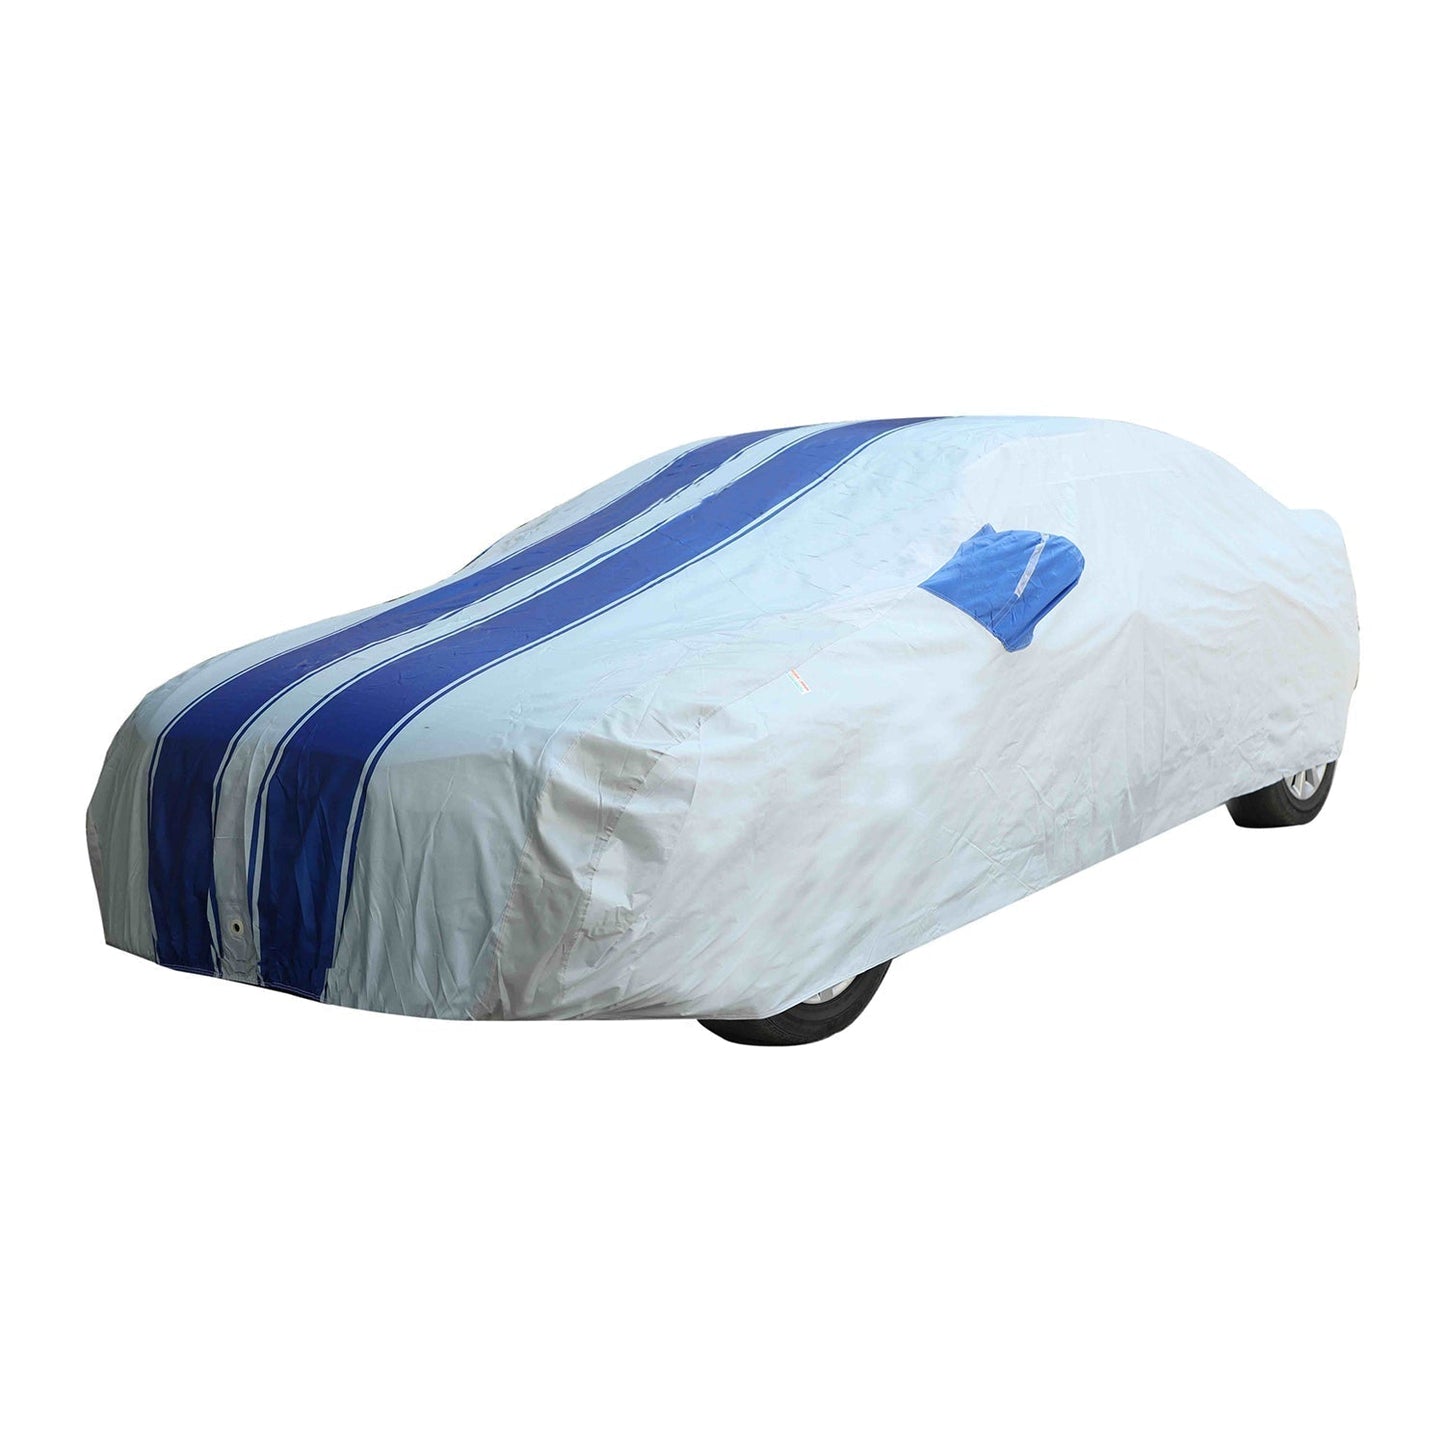 Oshotto 100% Blue dustproof and Water Resistant Car Body Cover with Mirror Pockets For Chevrolet Aveo